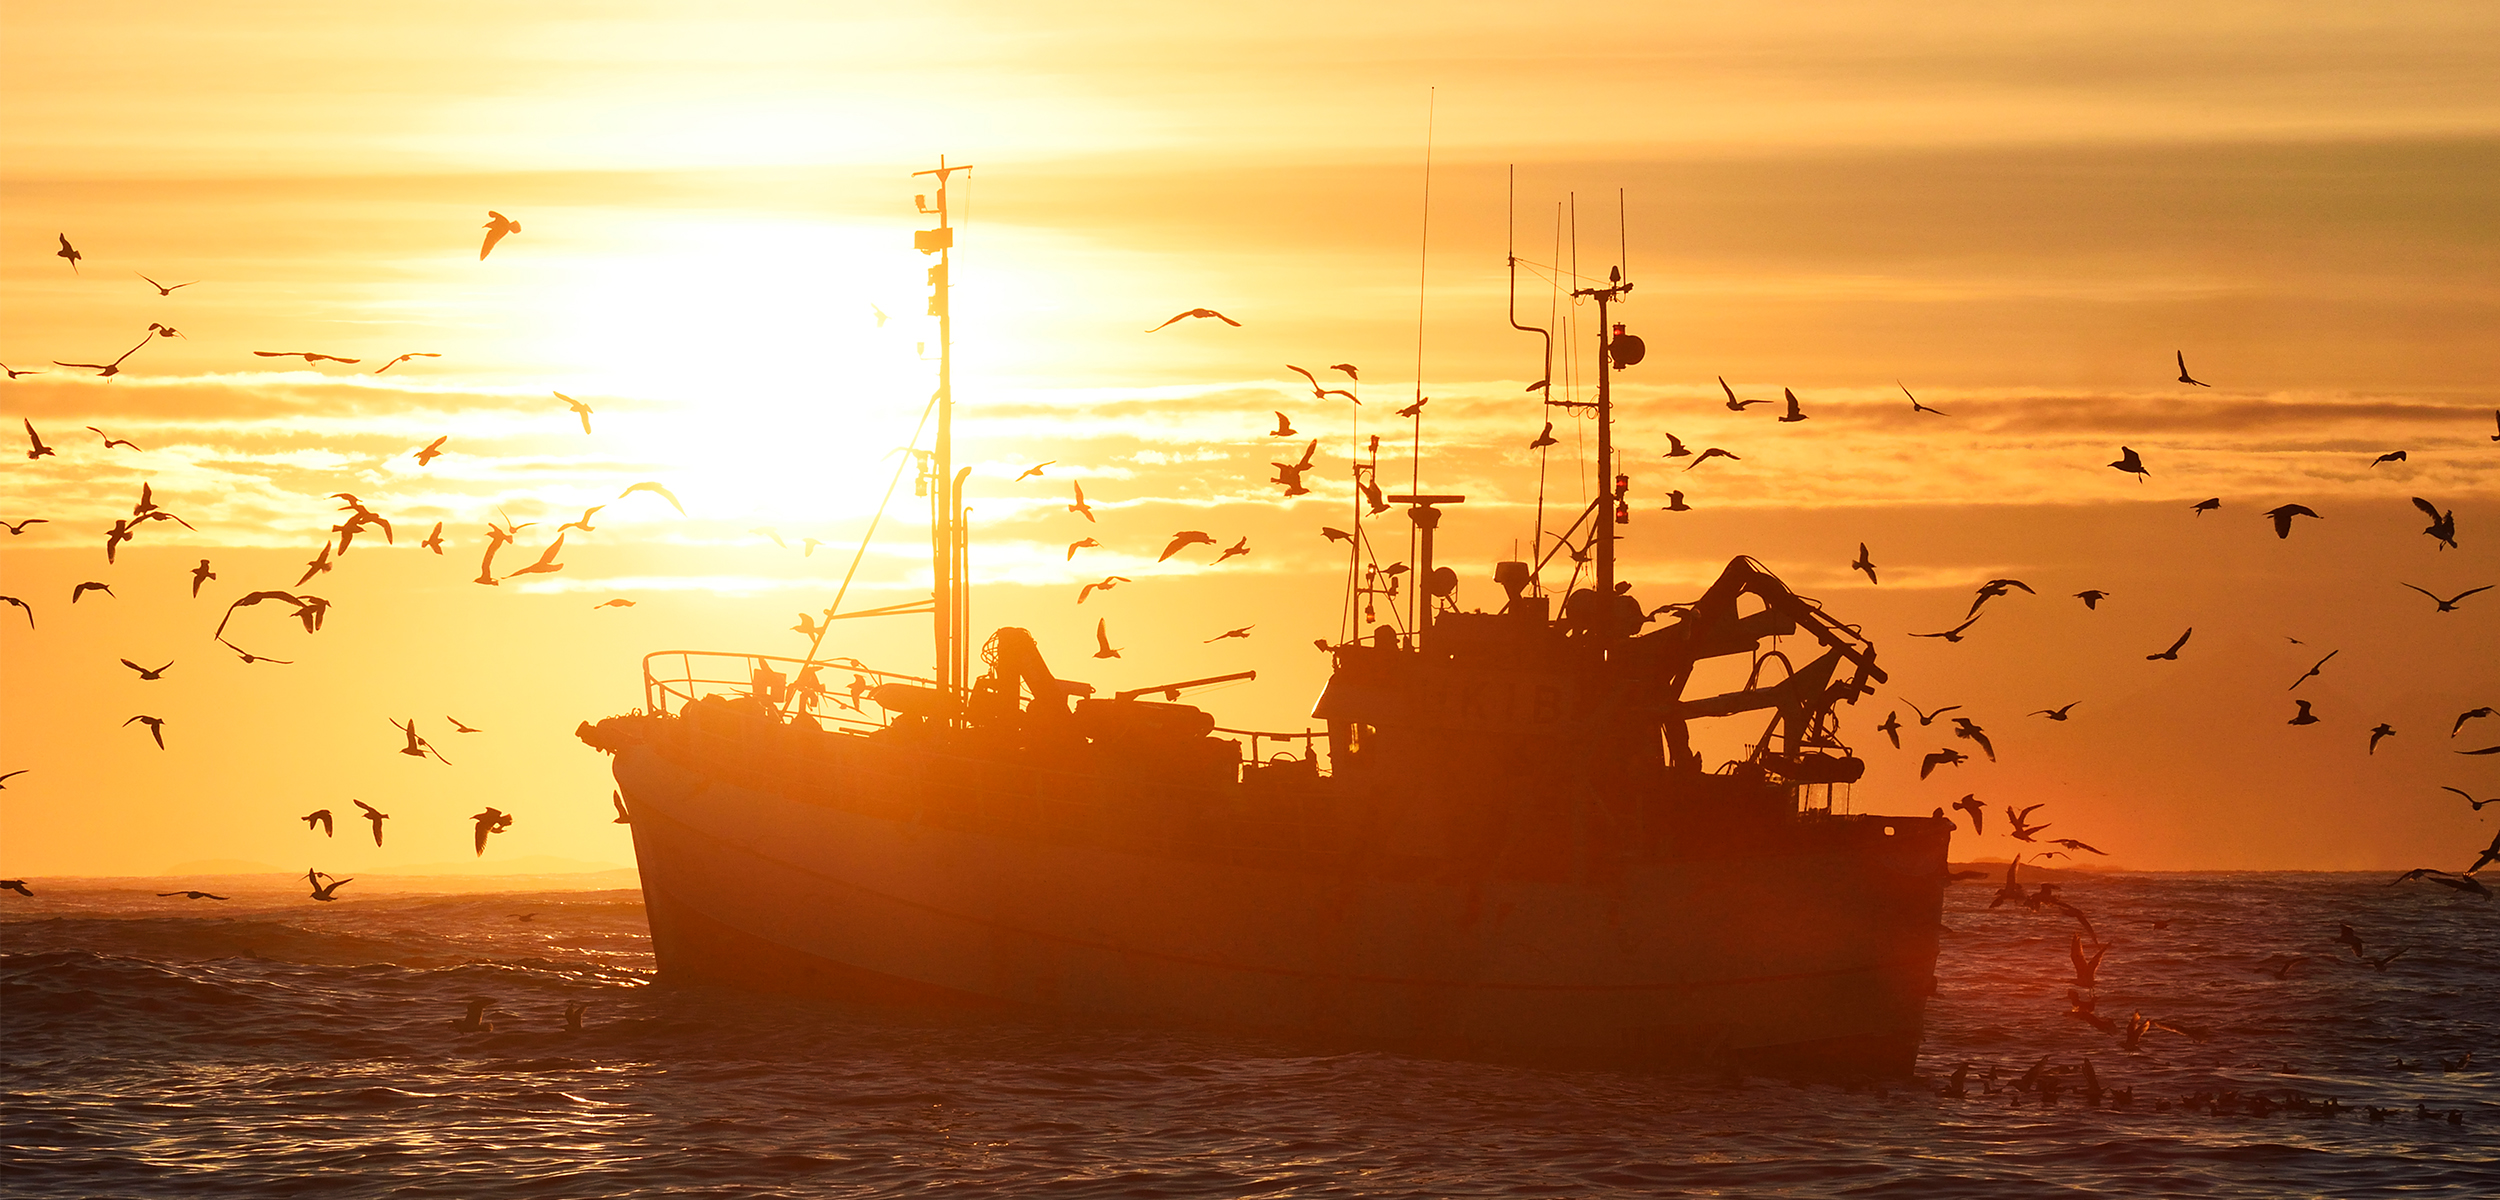 A fishing boat set against the bright orange sunset and the sky is filled with the silhouette of birds